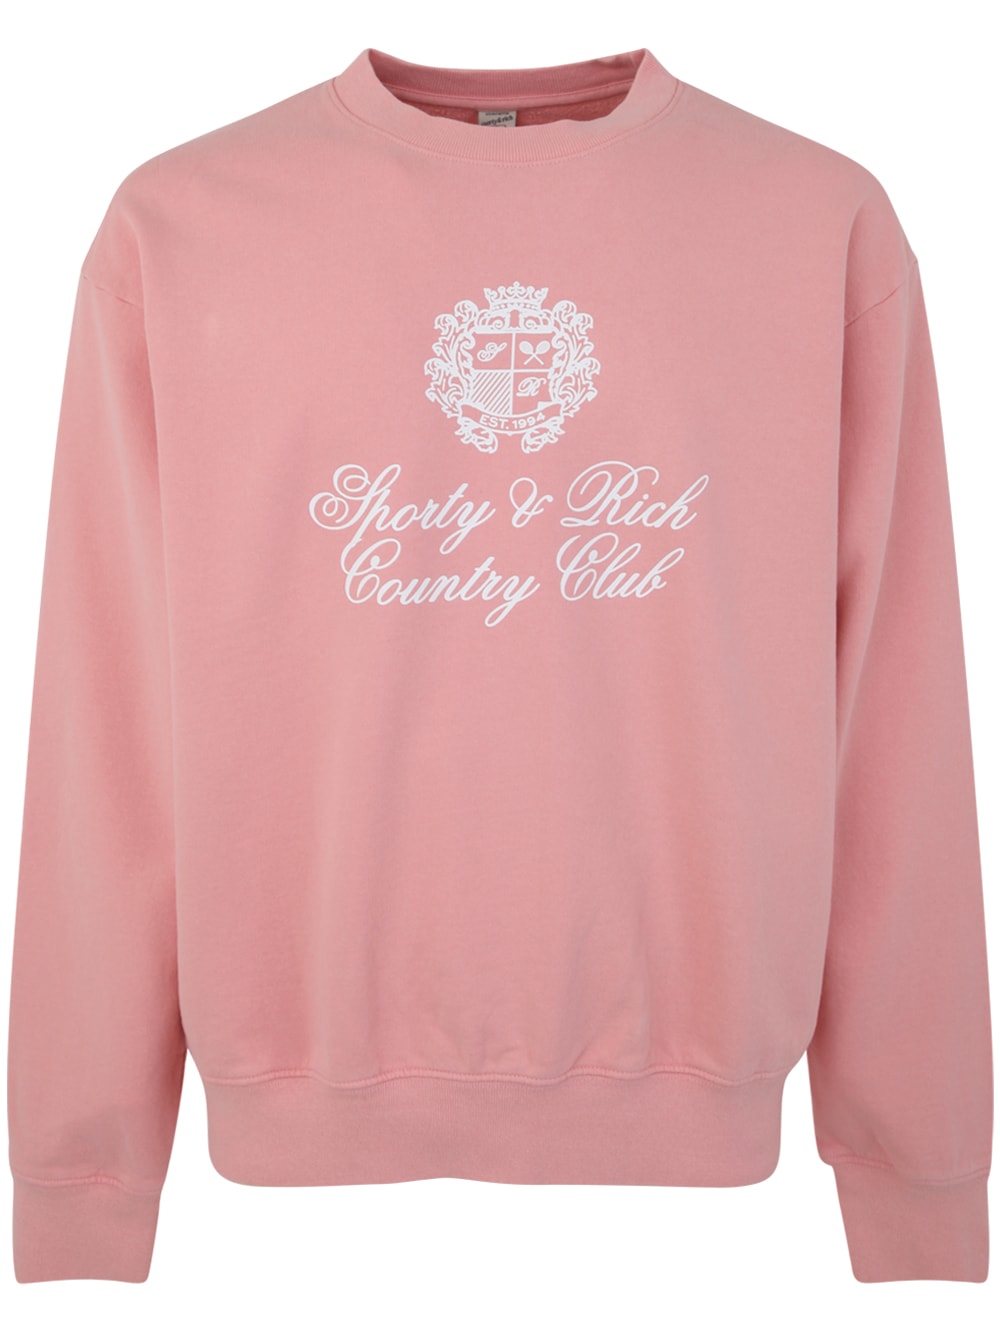 SPORTY &AMP; RICH COUNTRY CREST CREWNECK